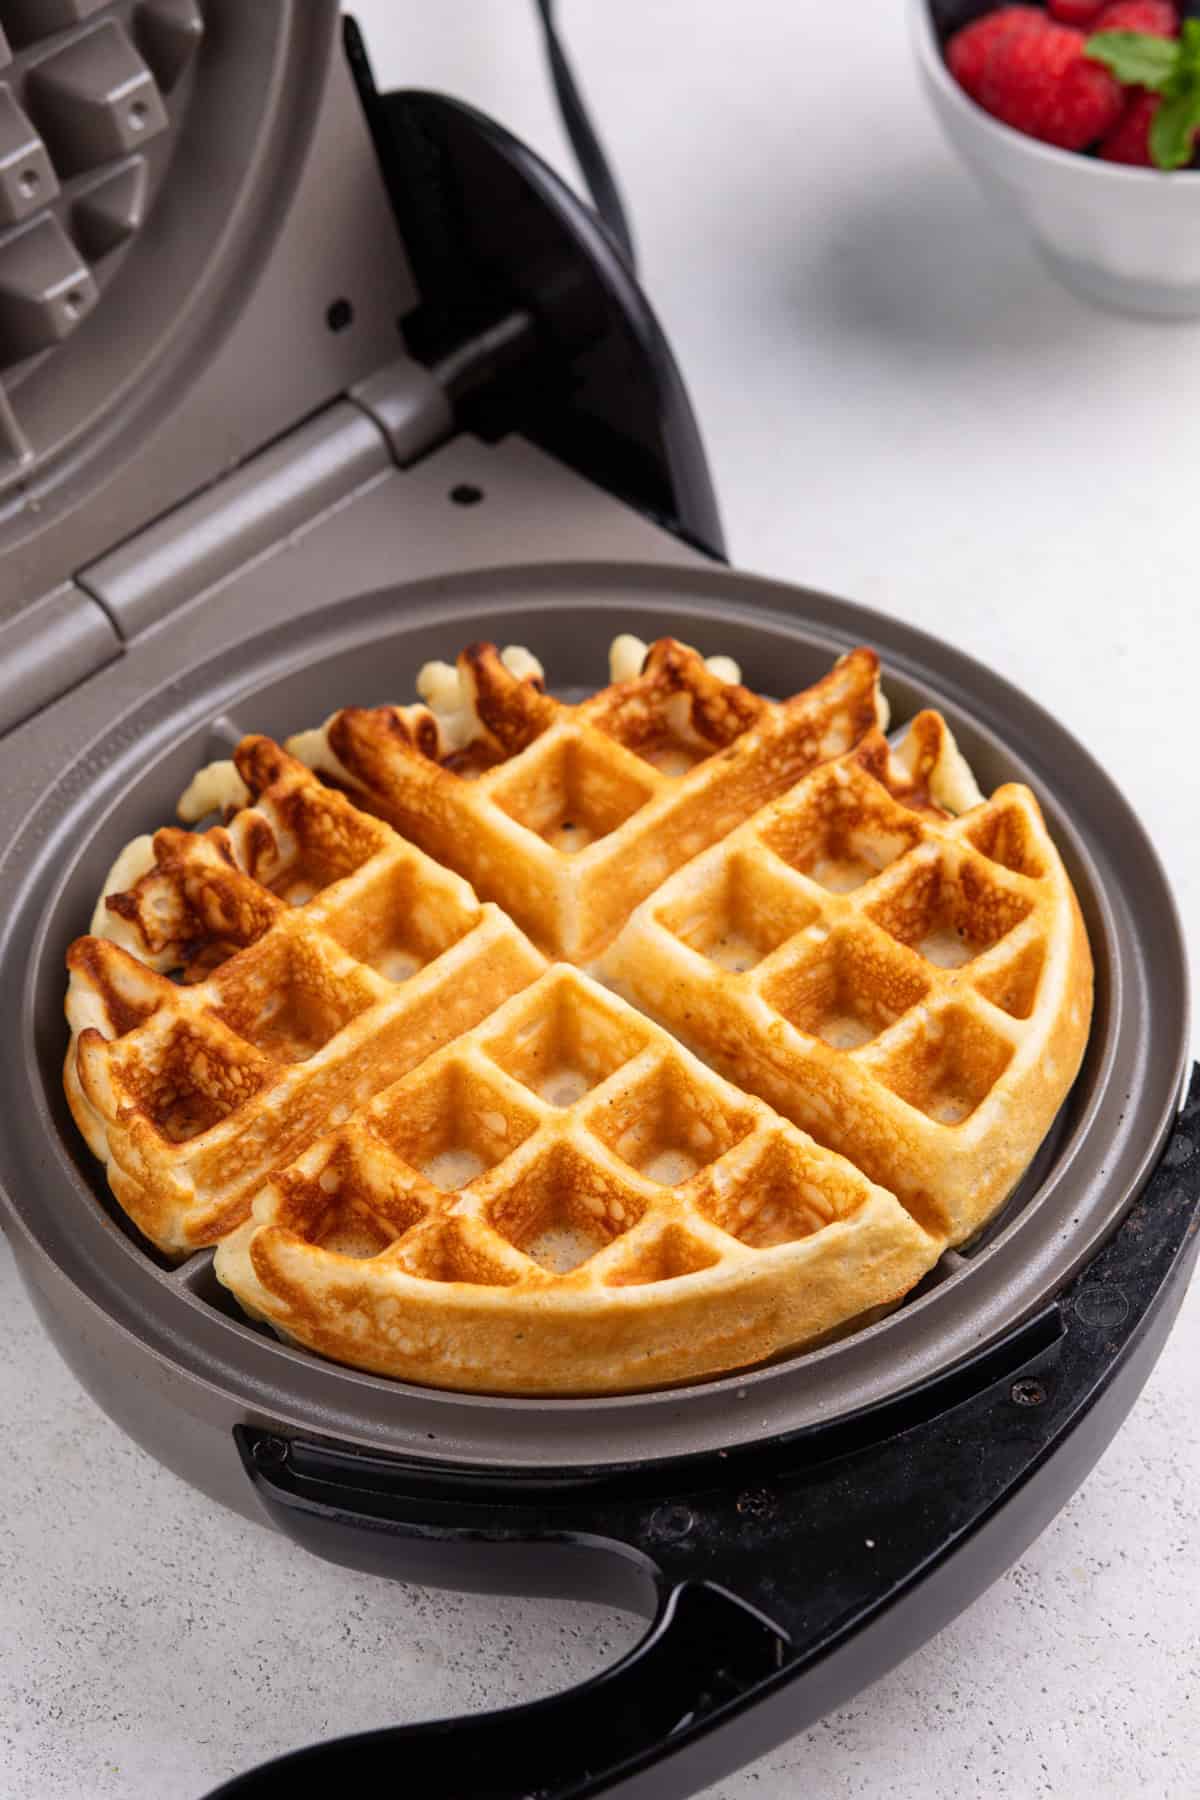 Cooked waffle in an open waffle iron.